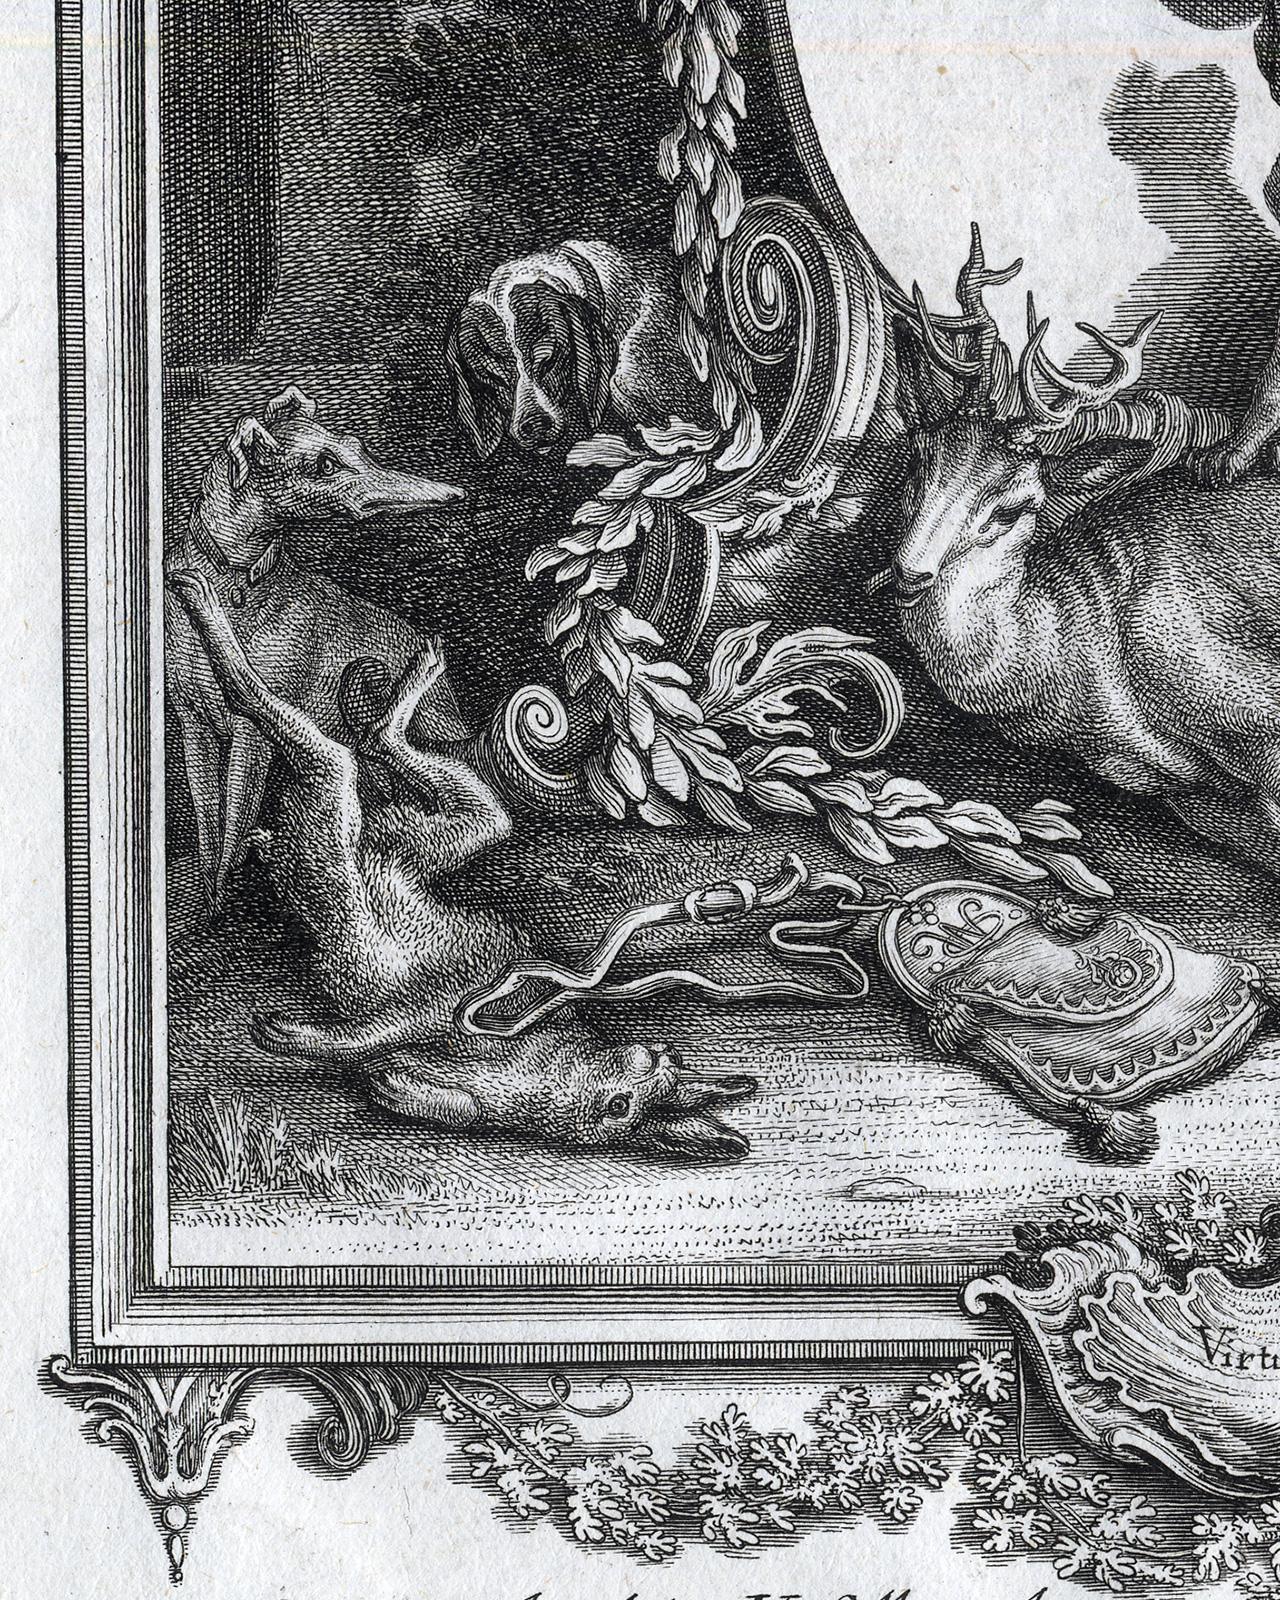 Subject: Antique print, titled: 'Virtute et Ingenio. Genaue und richtige Vorstellung der wundersamste Hische sowohl als anderer besondere Thiere. ' - ('Accurate and correct depiction of Deer and other special animals'). A bust of Selene looks down